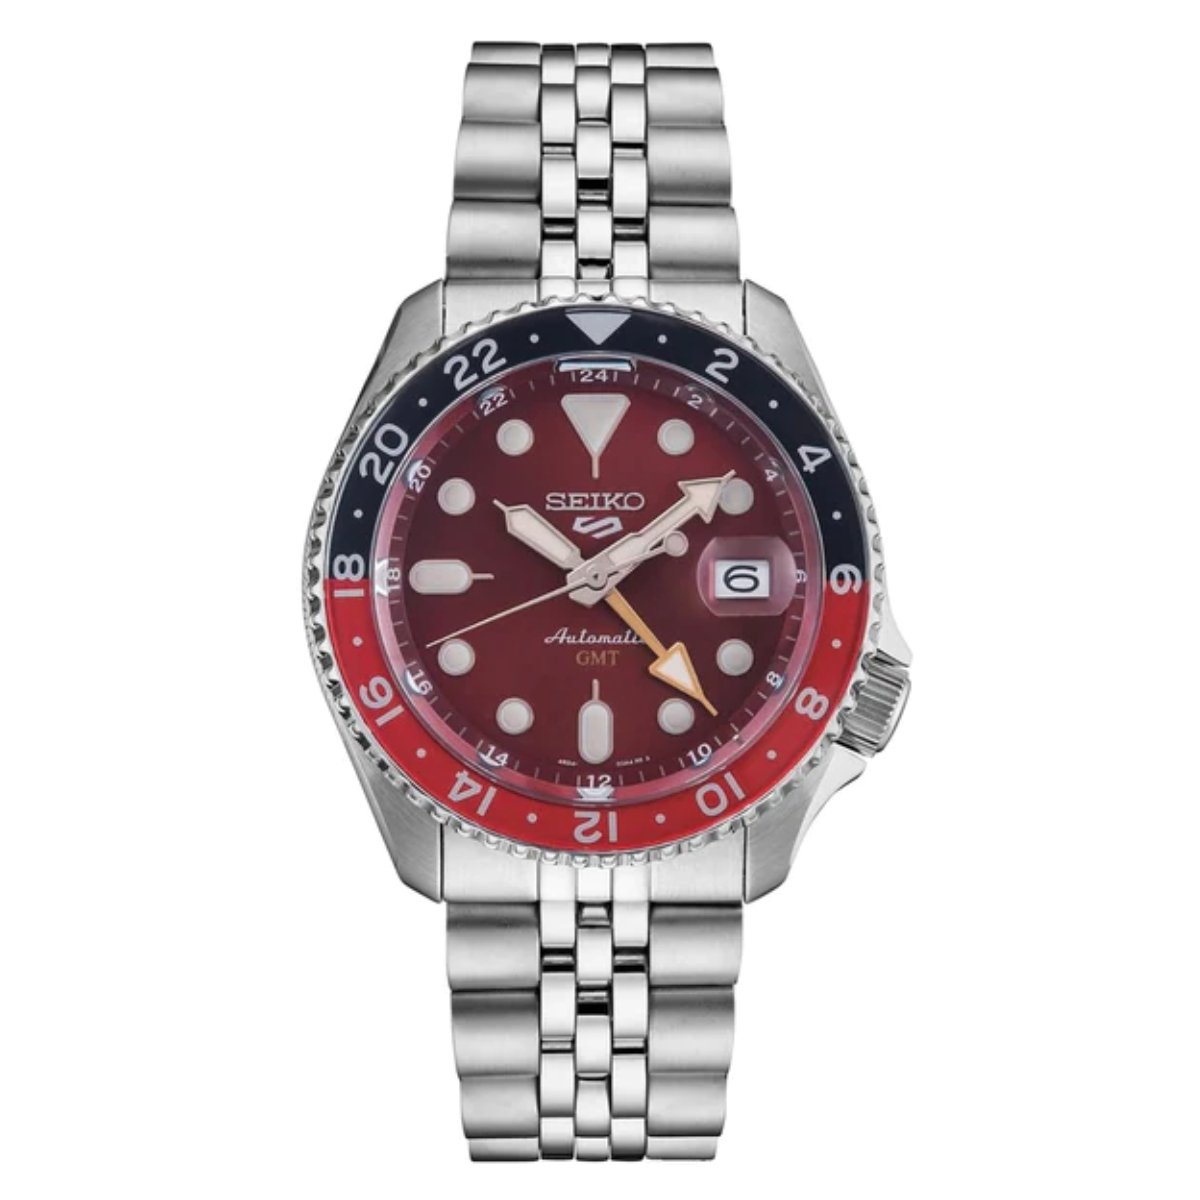 Seiko 5 Sports SSK031K SSK031K1 SSK031 GMT Limited Edition Automatic Watch (PRE-ORDER) -Seiko